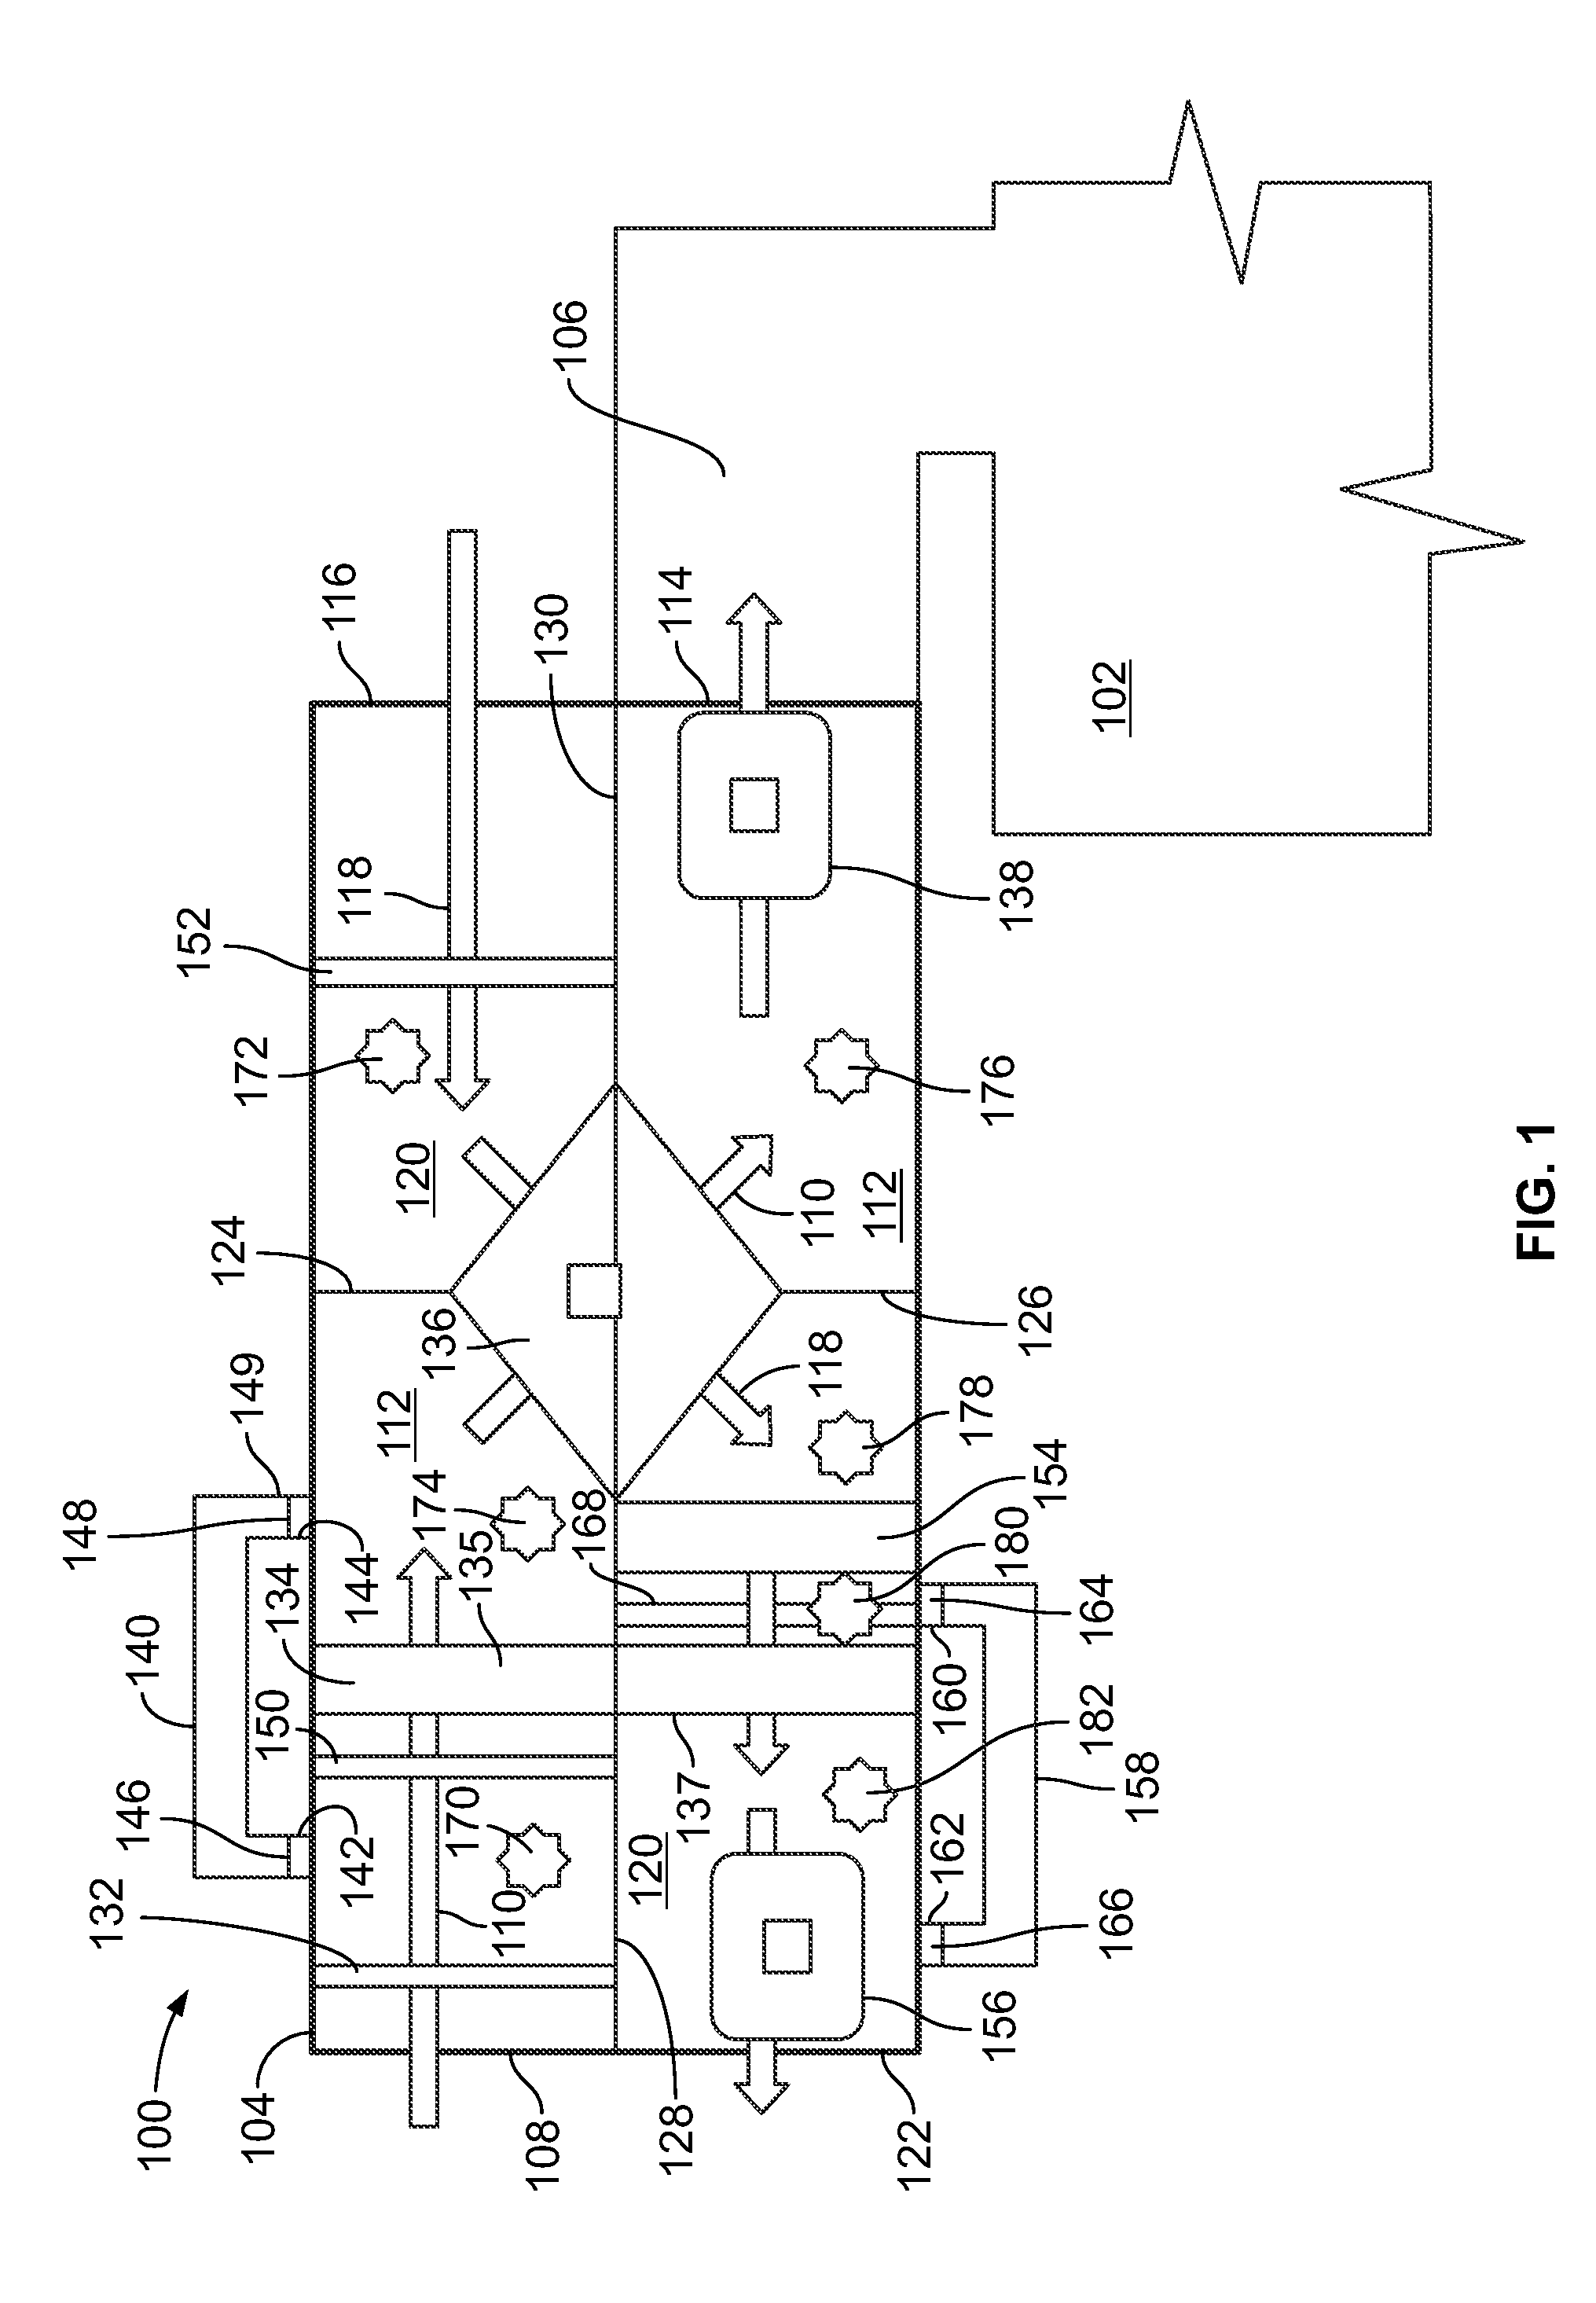 System and method for providing conditioned air to an enclosed structure